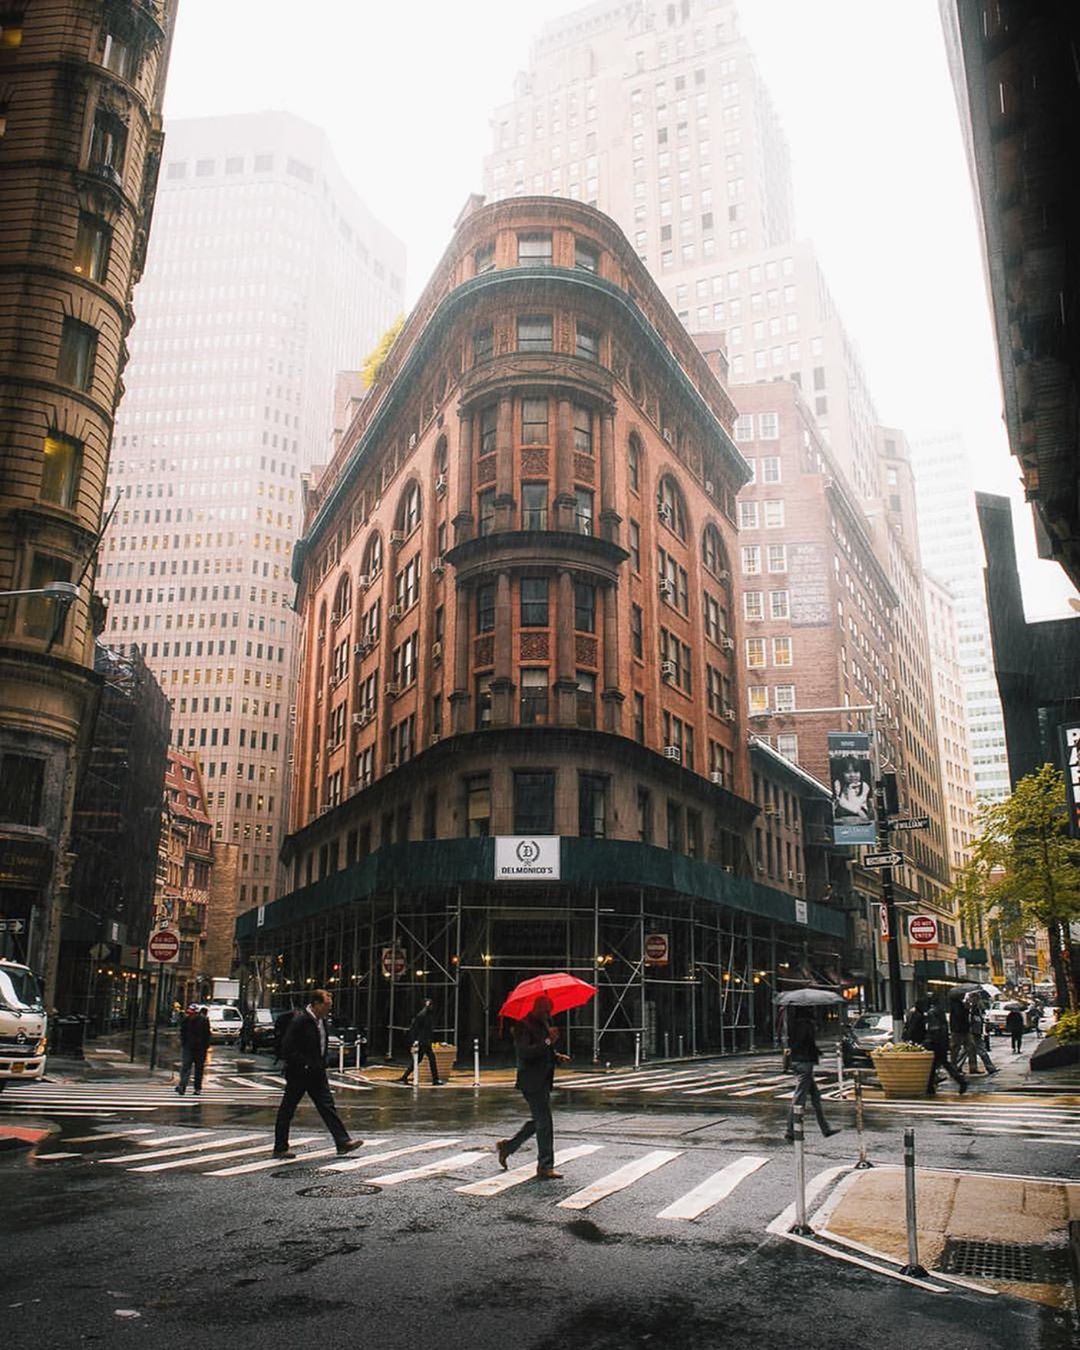 a rainy day in new york